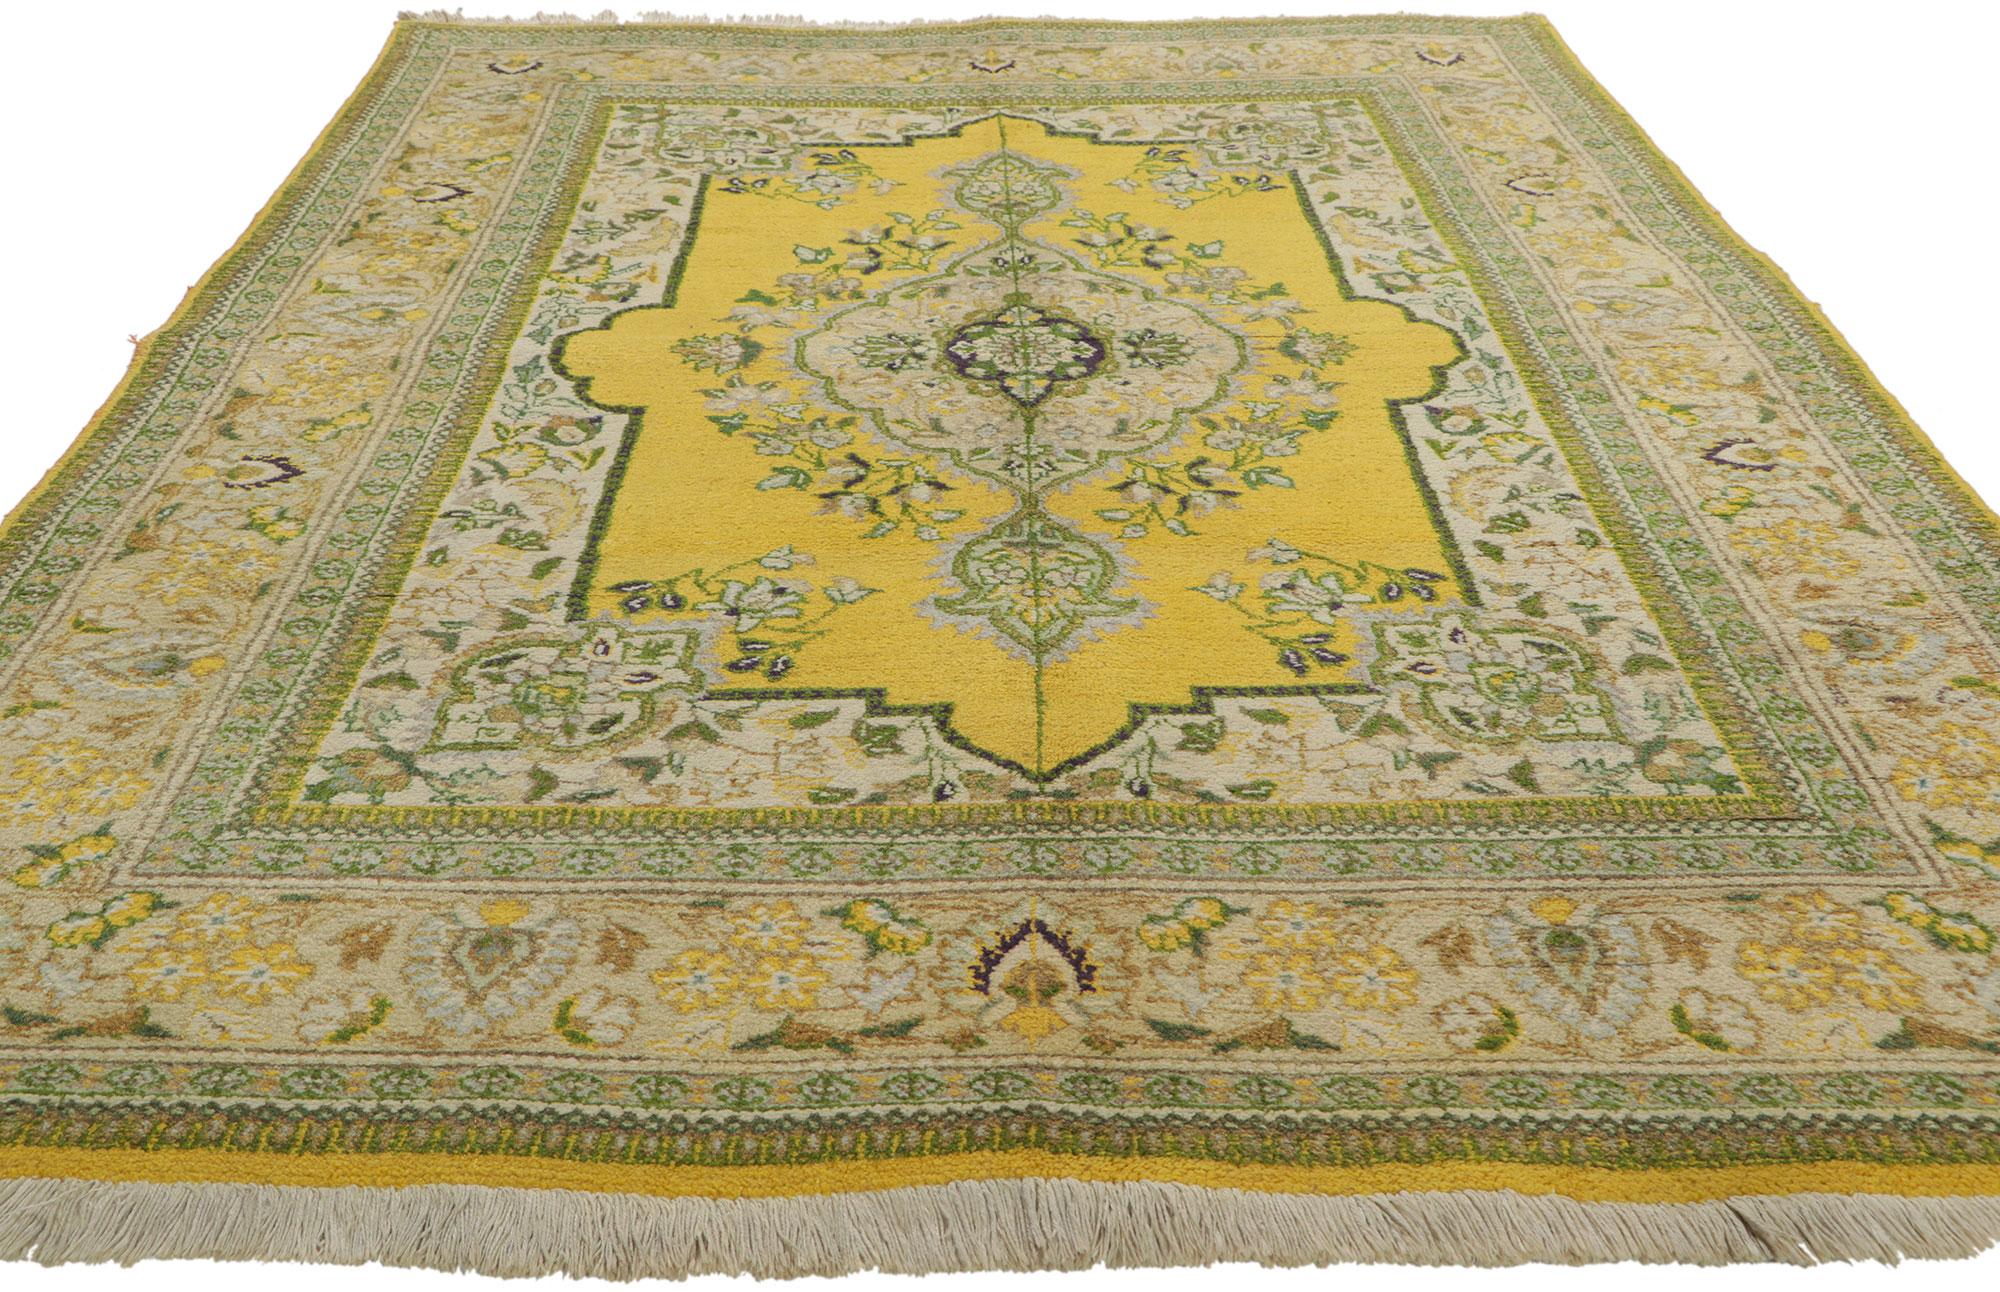 Hand-Knotted Colorful Vintage Persian Tabriz Rug with Vibrant Earth-Tone Colors For Sale